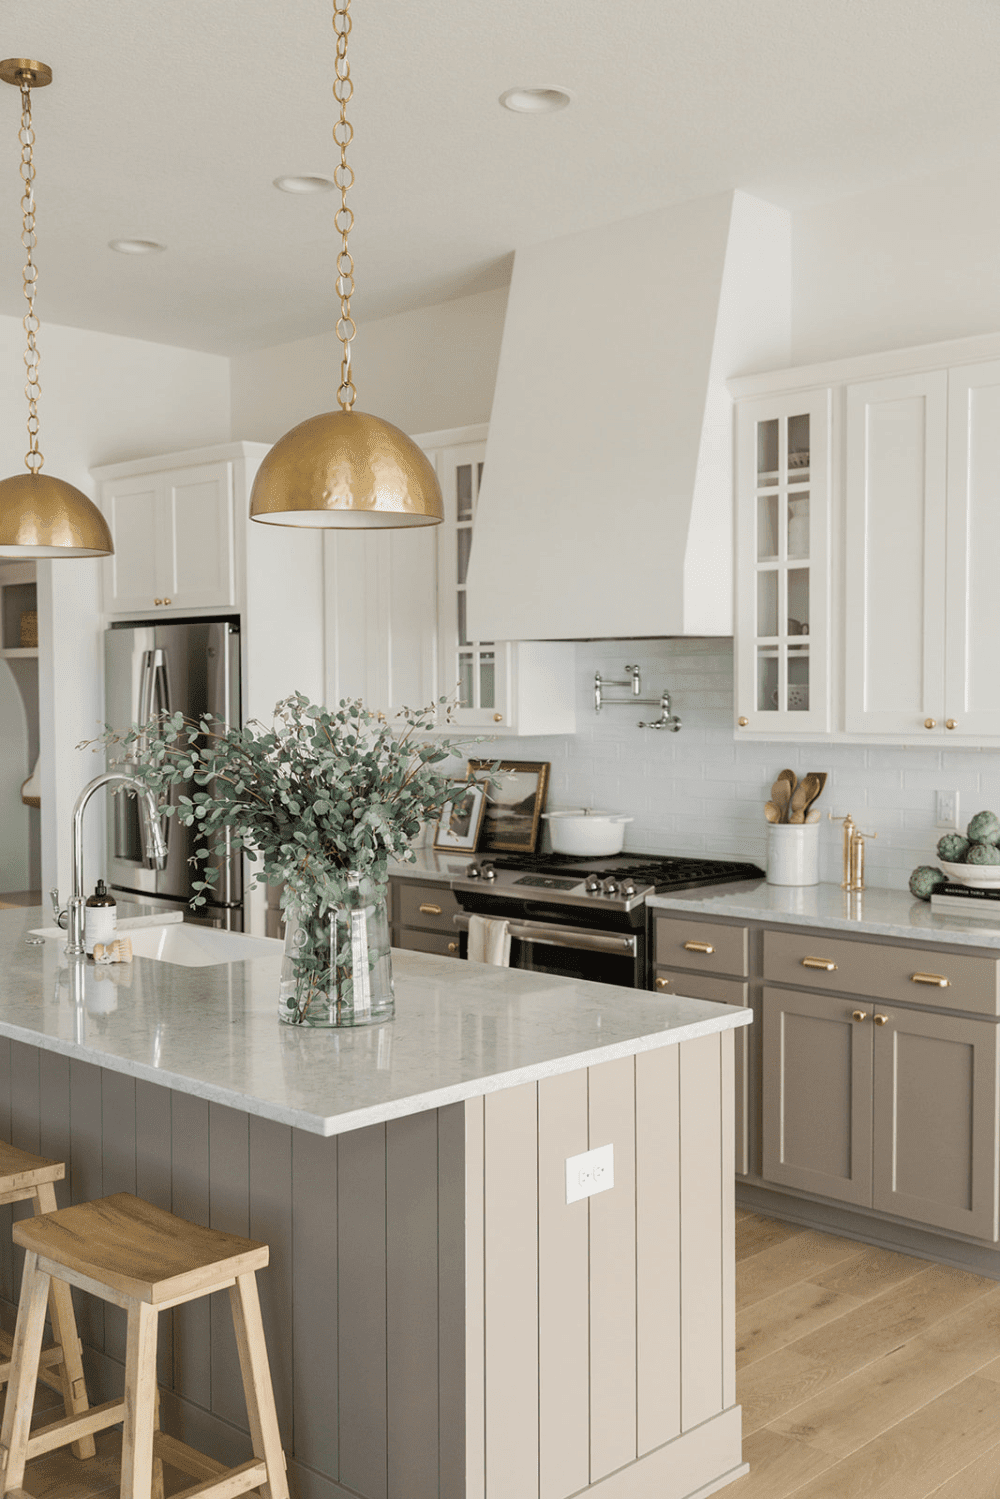 Dreamy Kitchens: Explore Kitchen Design Ideas for Every Home